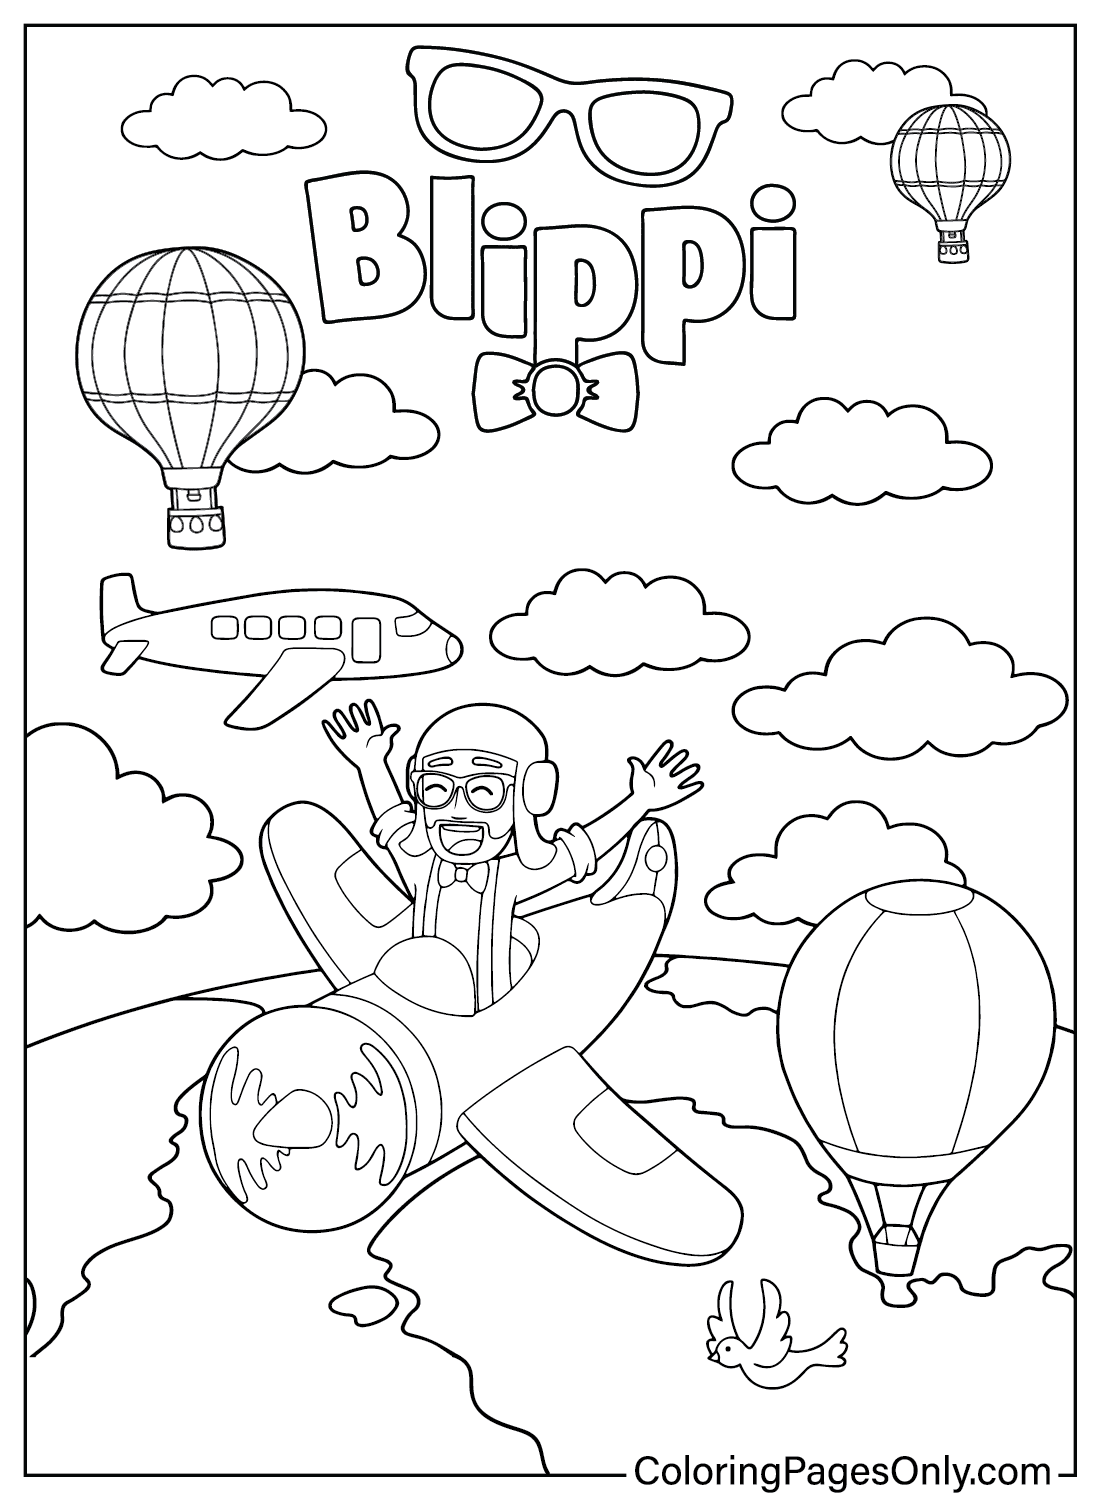 Blippi Coloring Page Free from Blippi